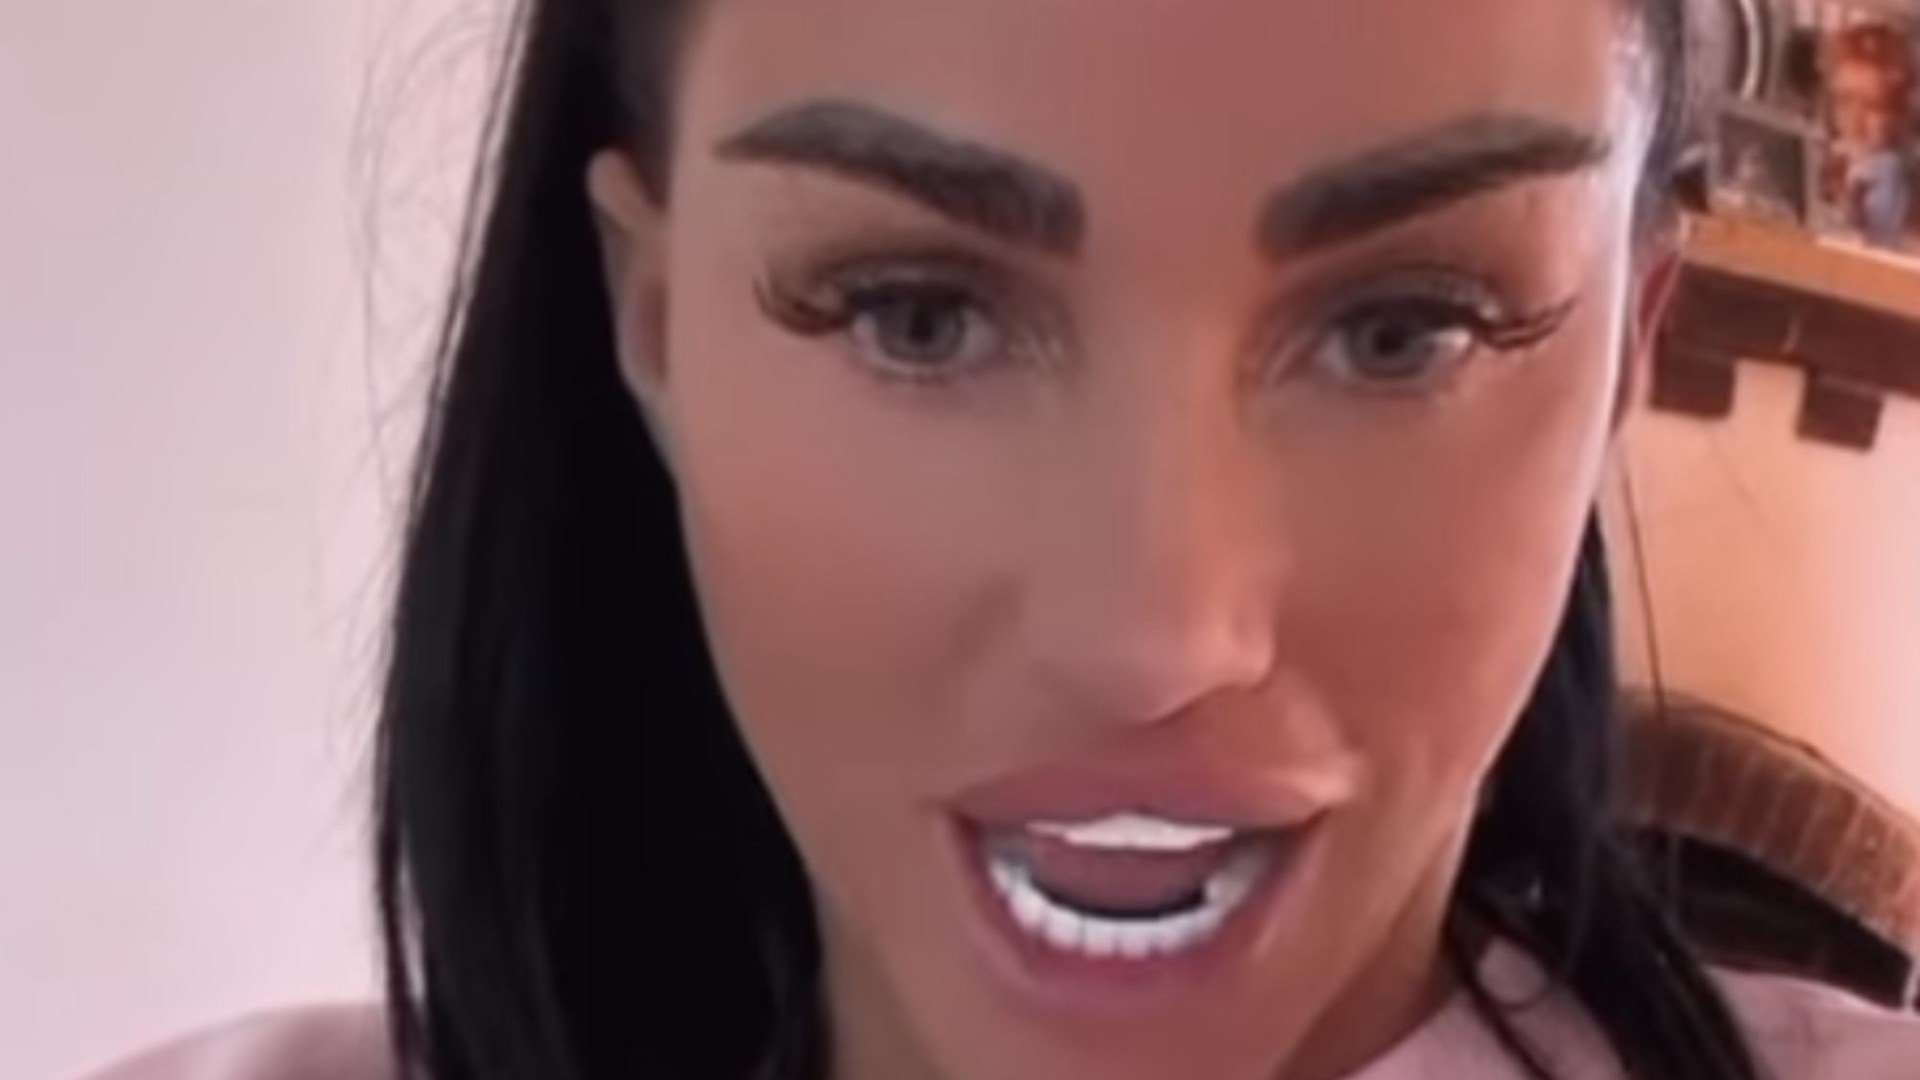 Katie Price breaks silence in Mucky Mansion after authority serves bankrupt star with eviction notice [Video]